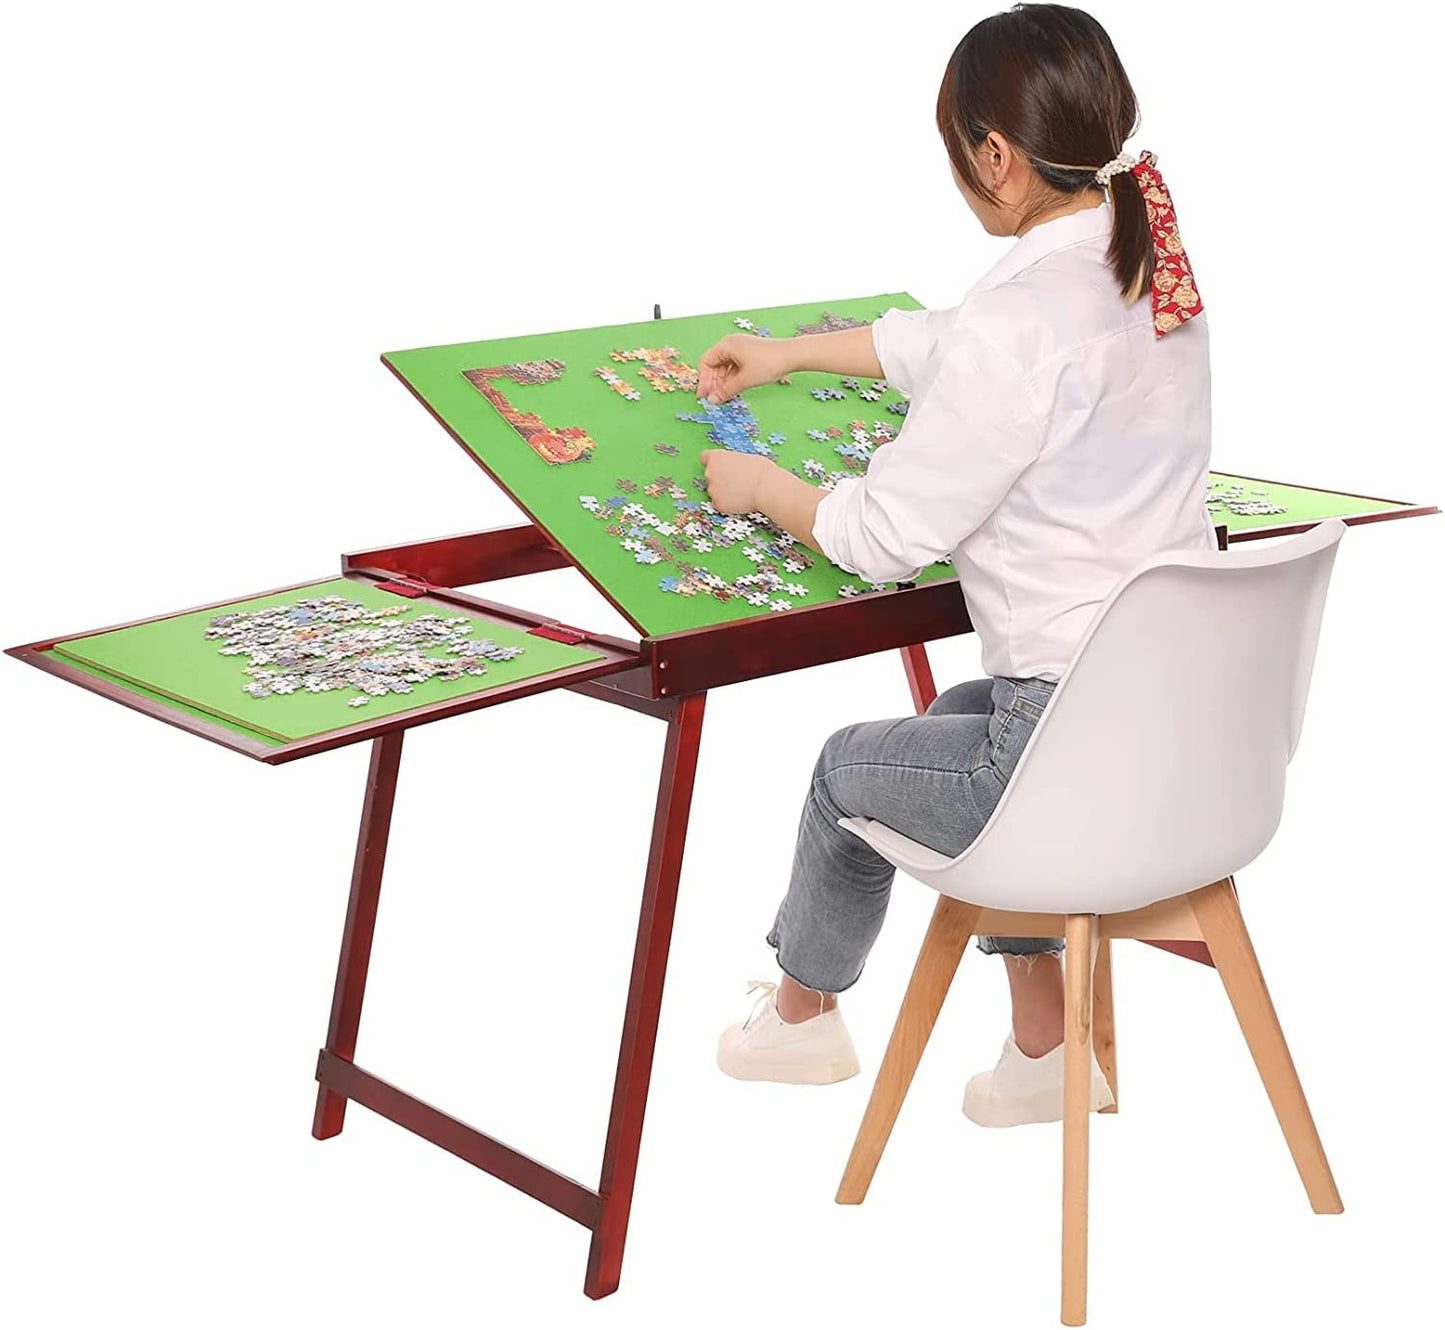 1500 Piece Jigsaw Puzzle Table with Drawers & Folding Legs for Coffee